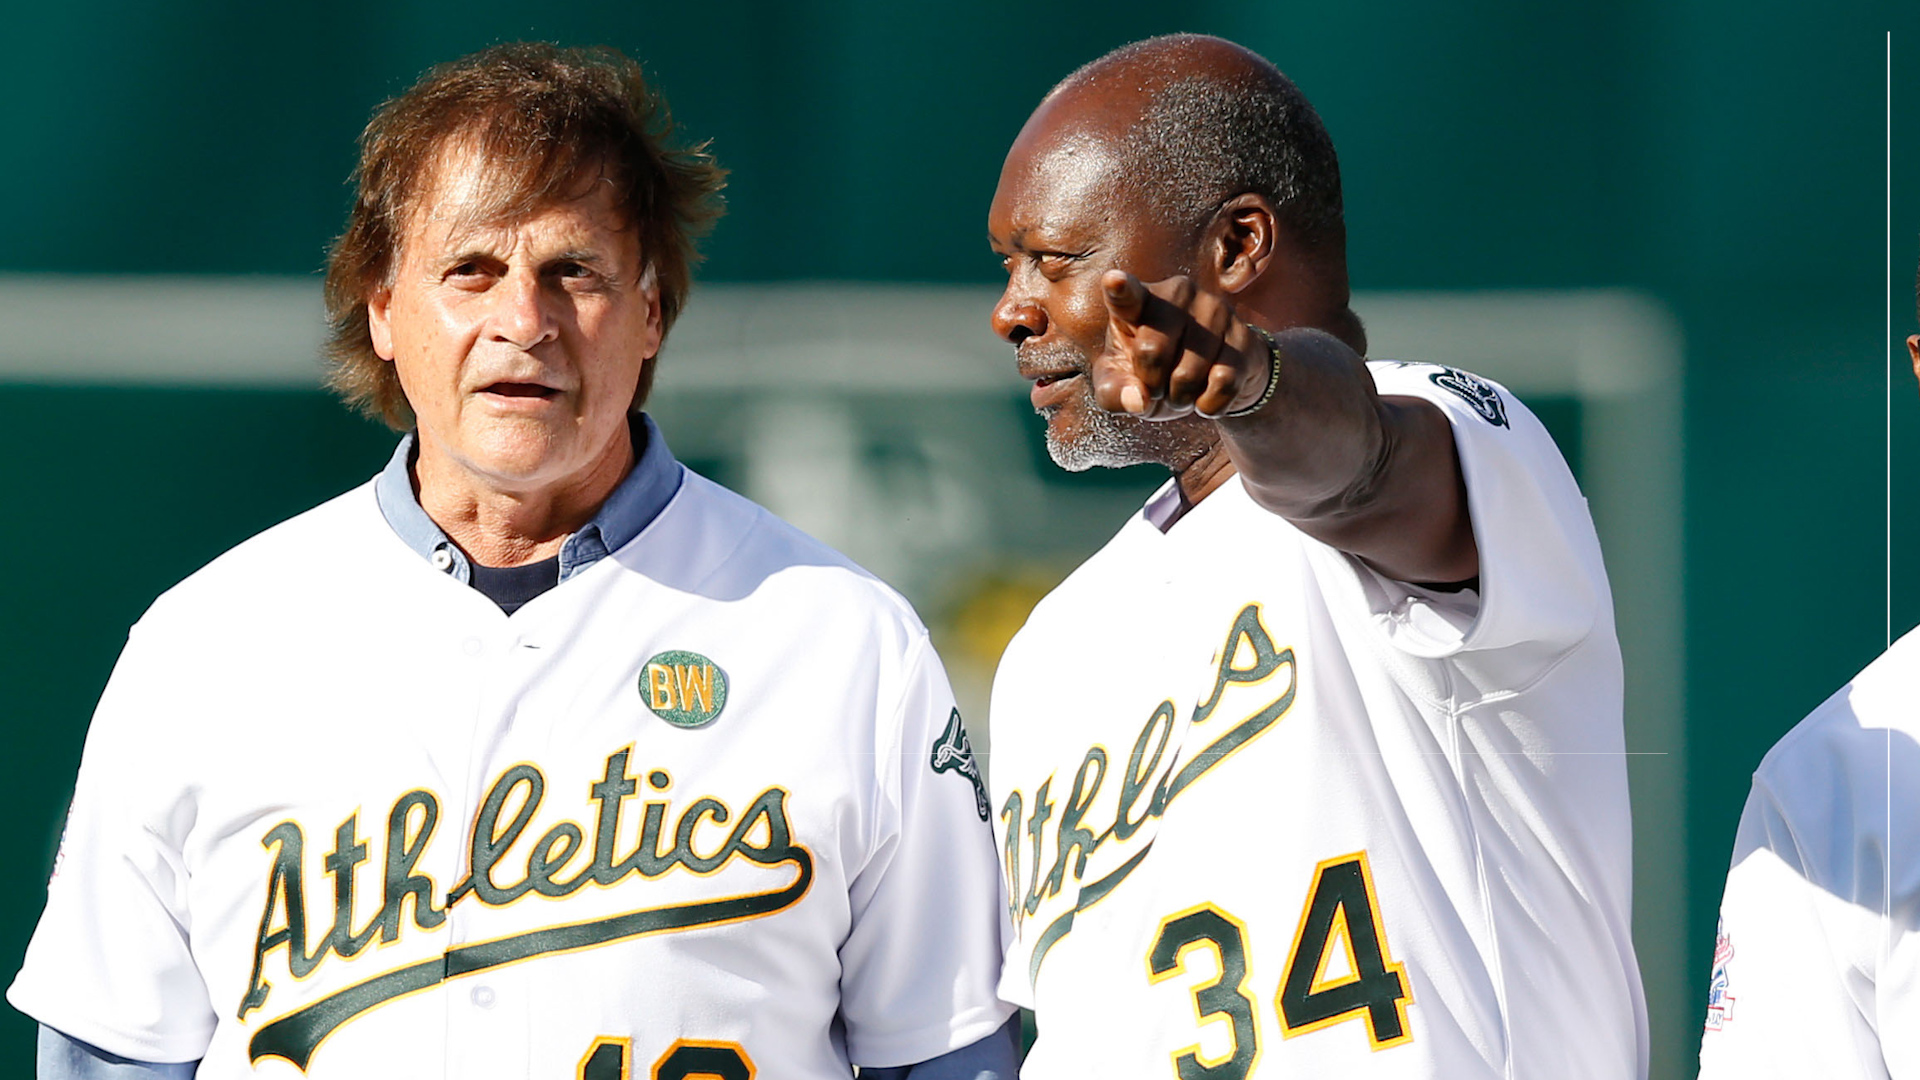 Former Oakland A's ace Dave Stewart gets emotional over honor